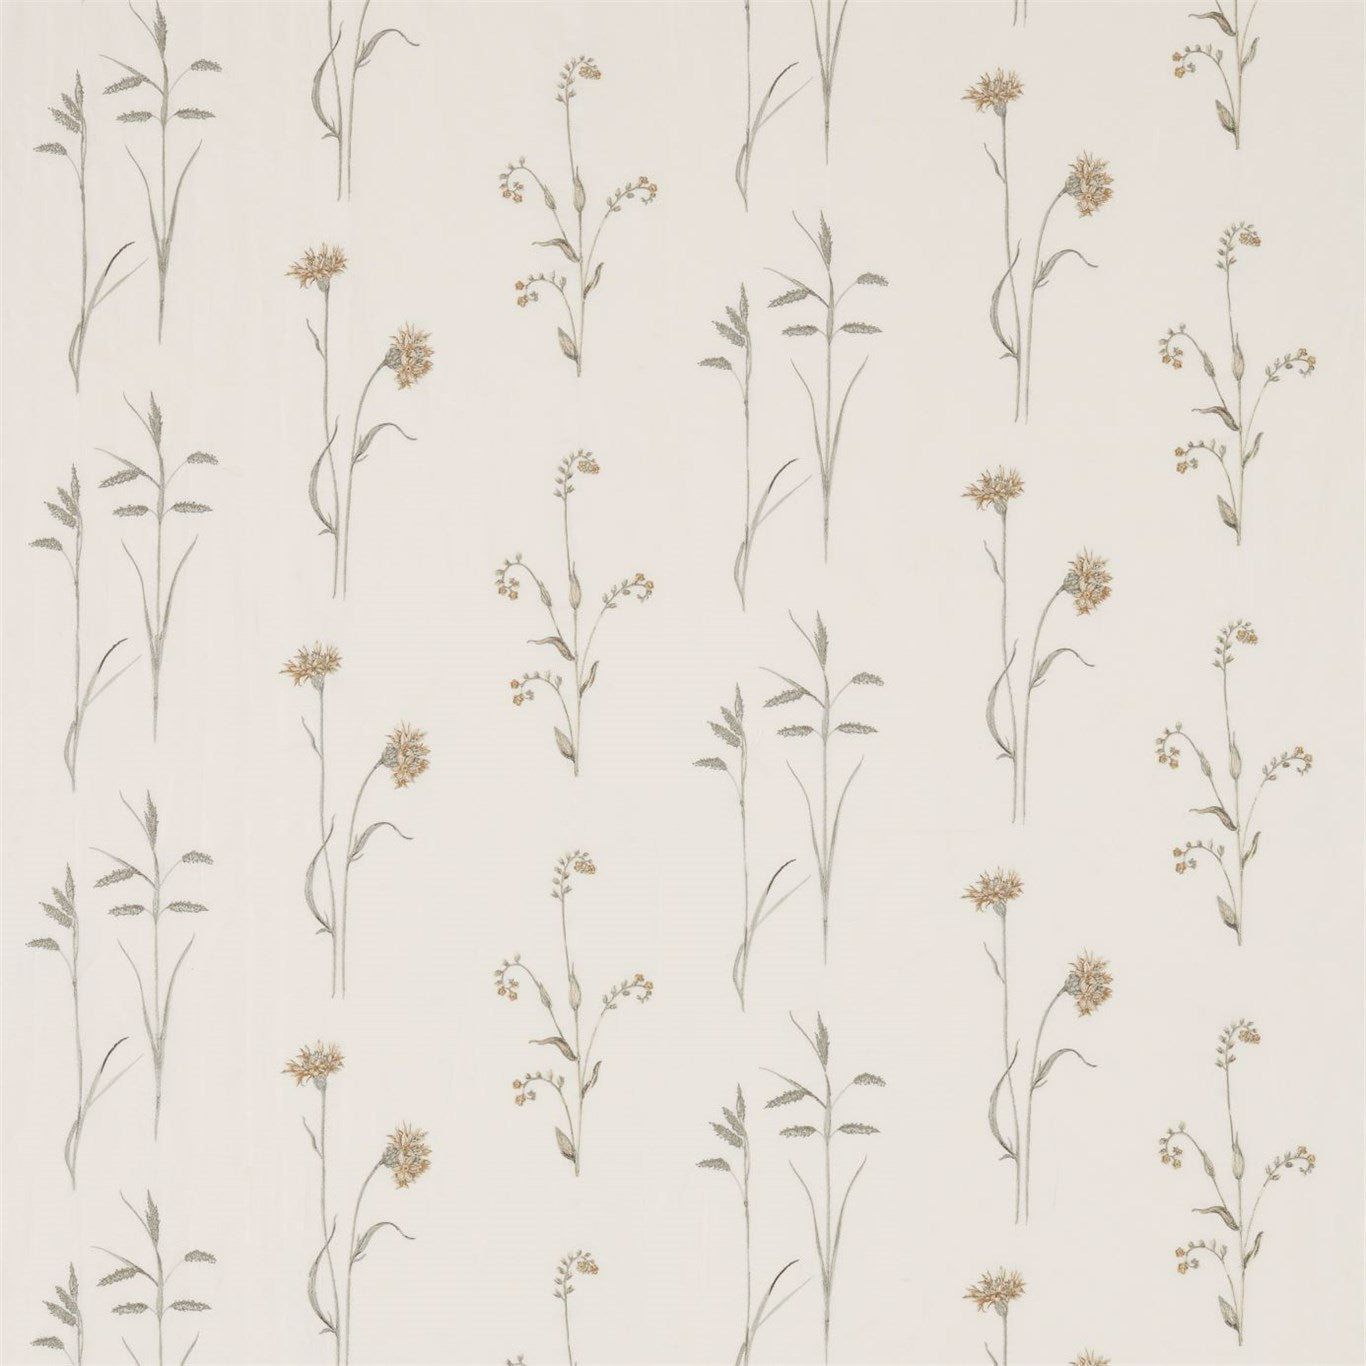 Meadow Grasses Fabric by Sanderson